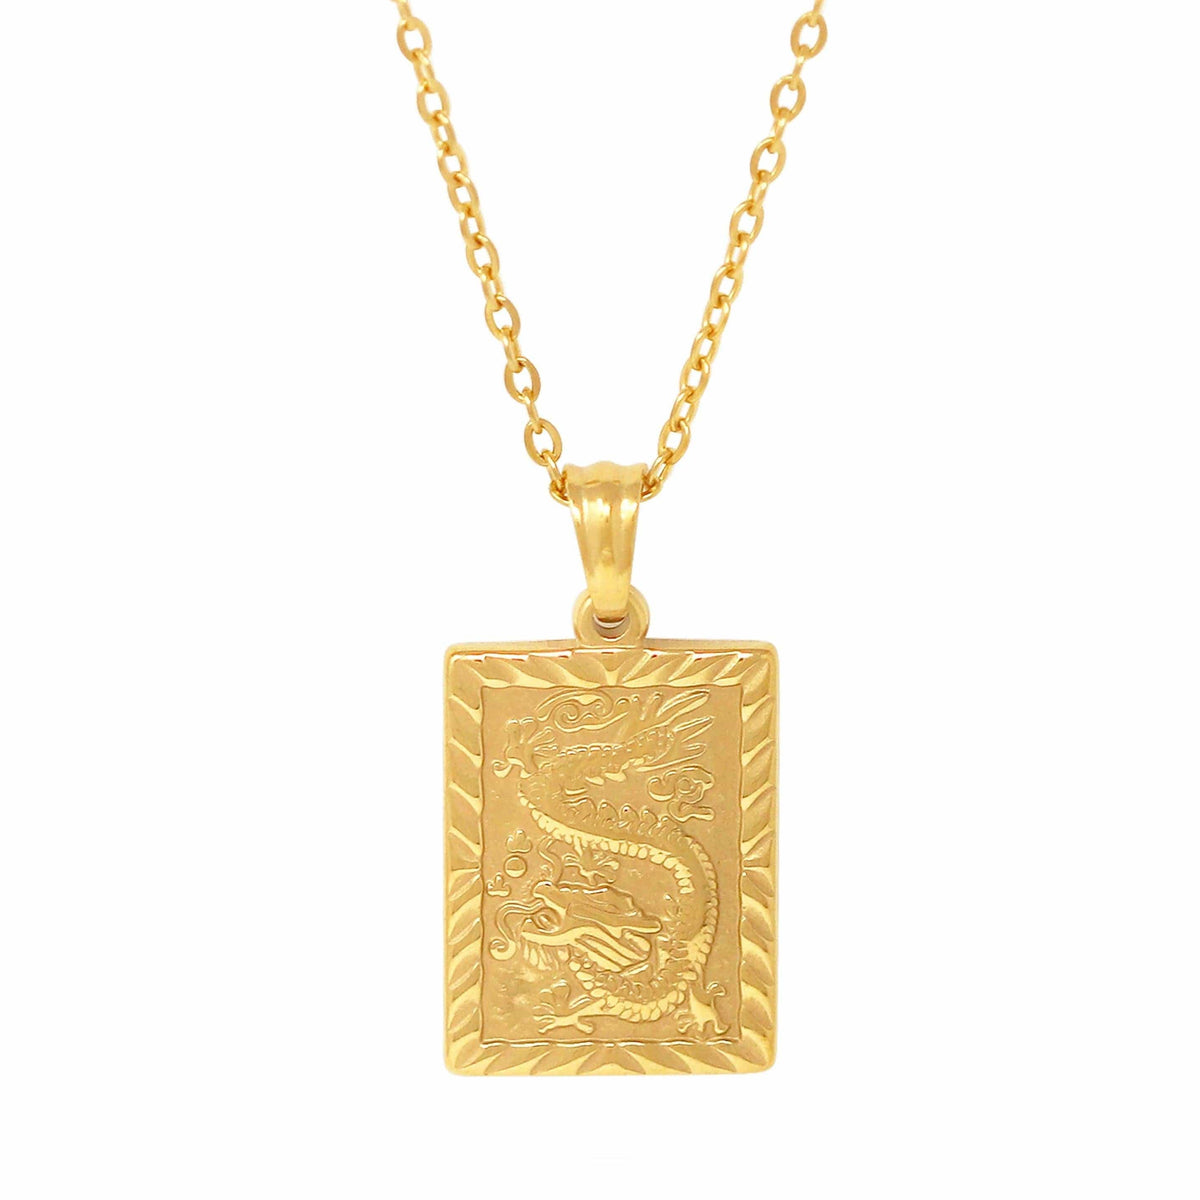 BohoMoon Stainless Steel Dragon Tablet Necklace Gold